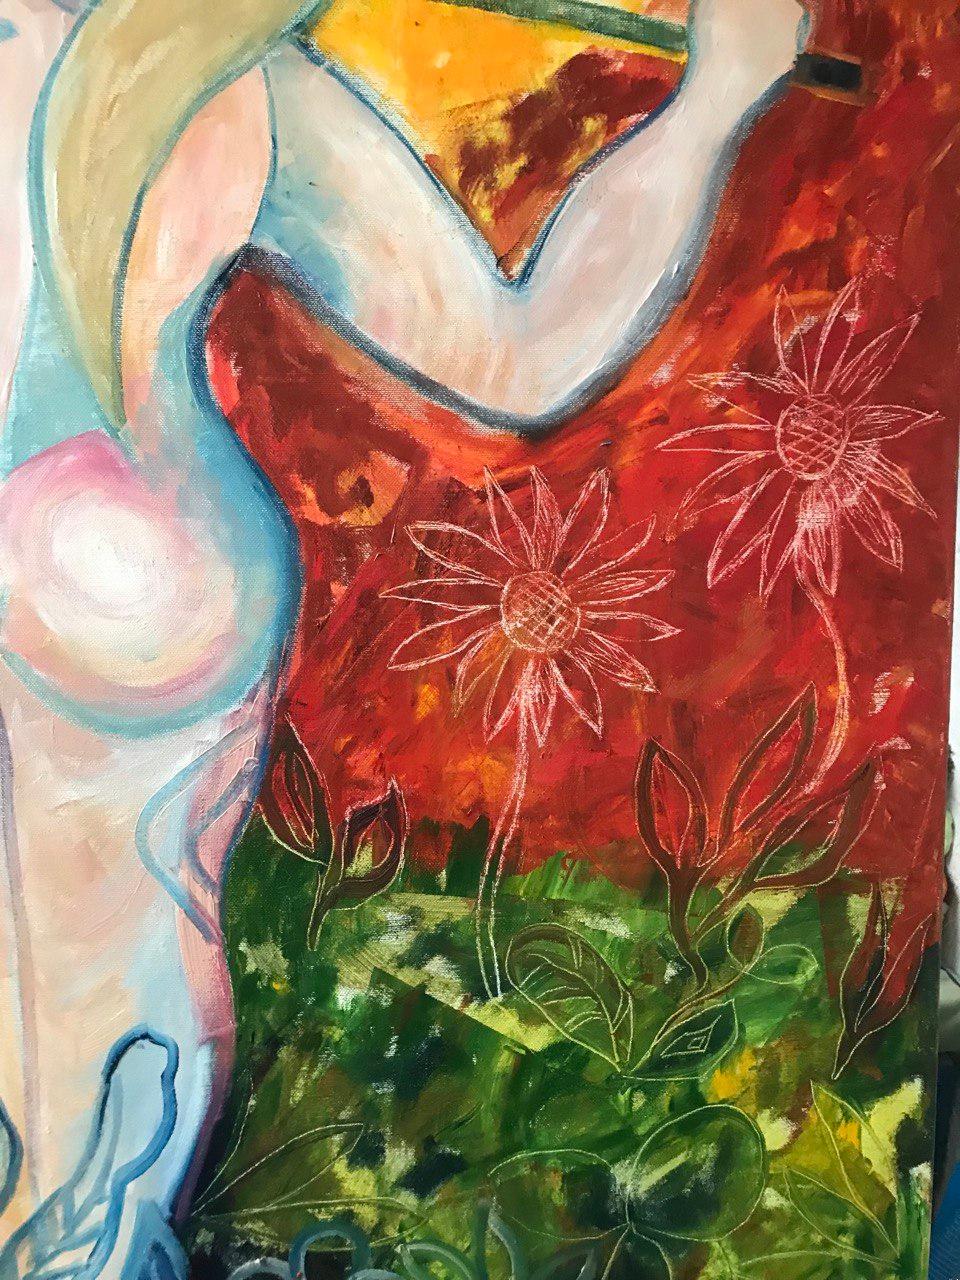 The Power of Good, original oil painting by Tetiana Pchelnykova For Sale 10